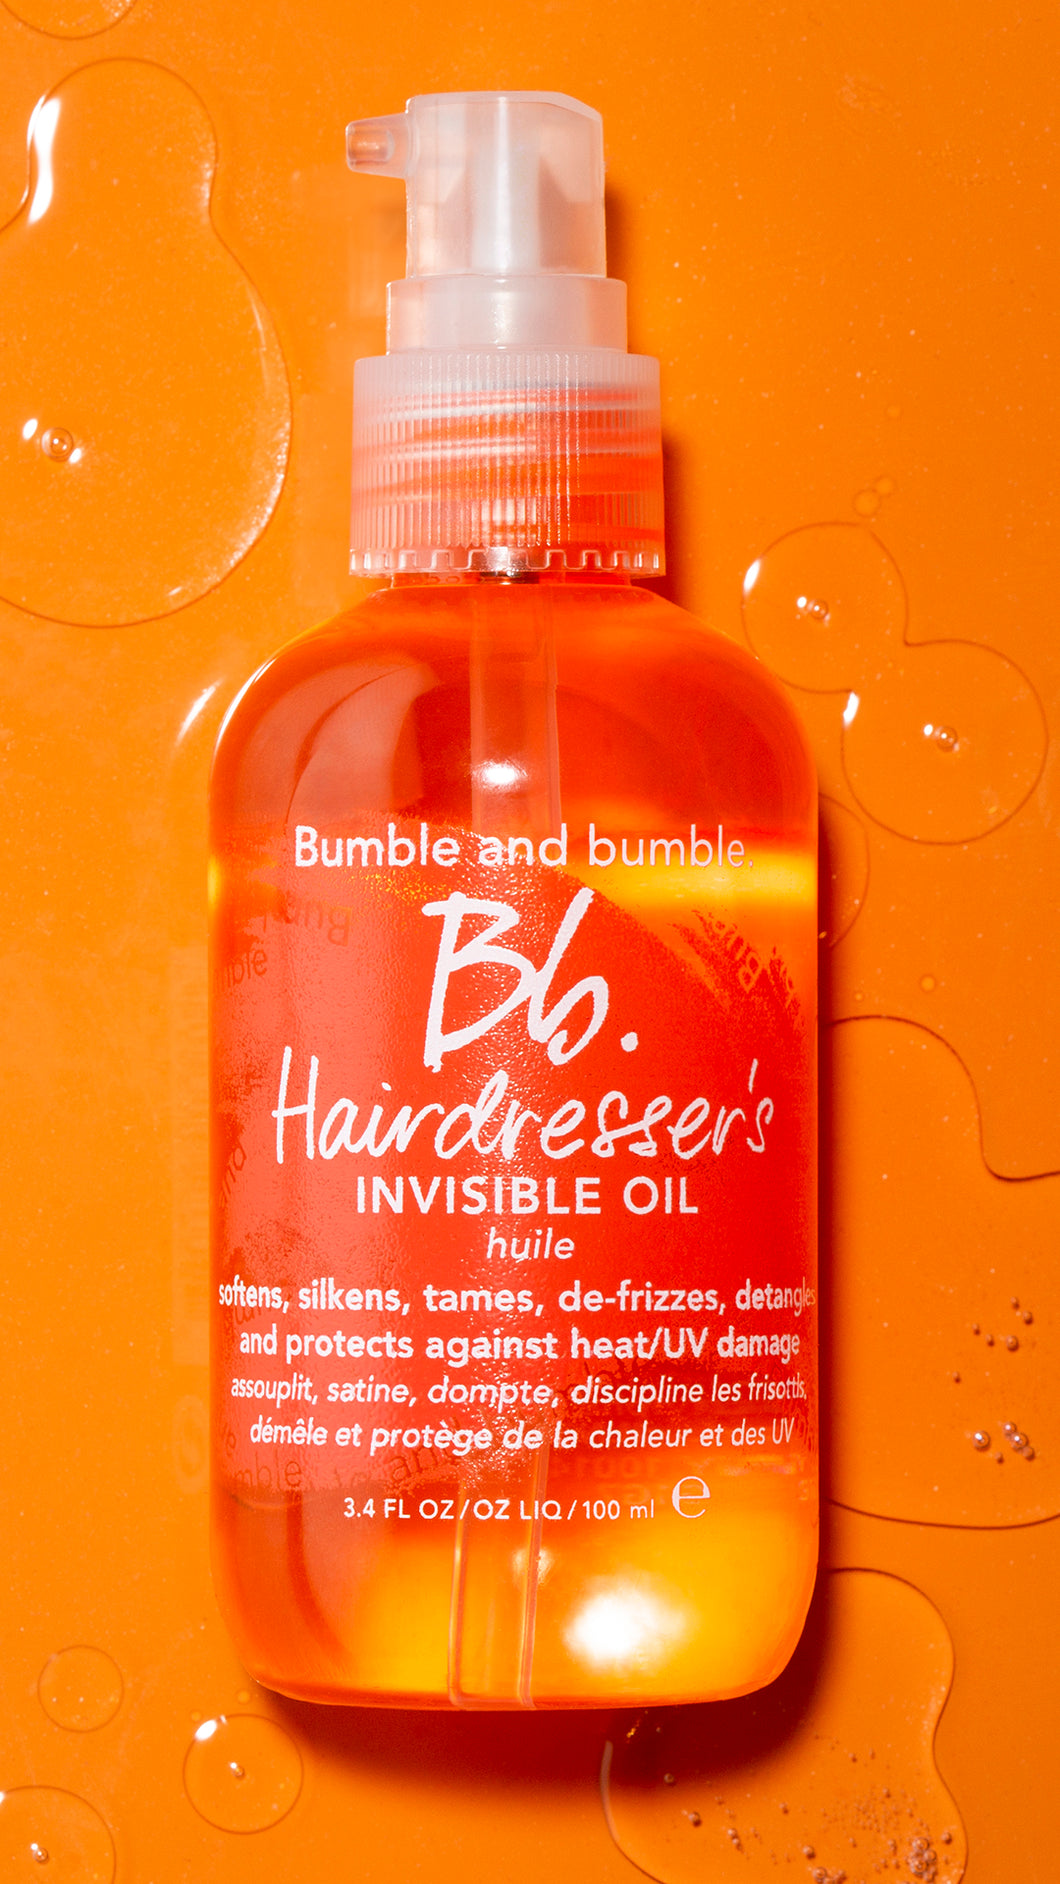 Bb Hairdresser's Invisible Oil